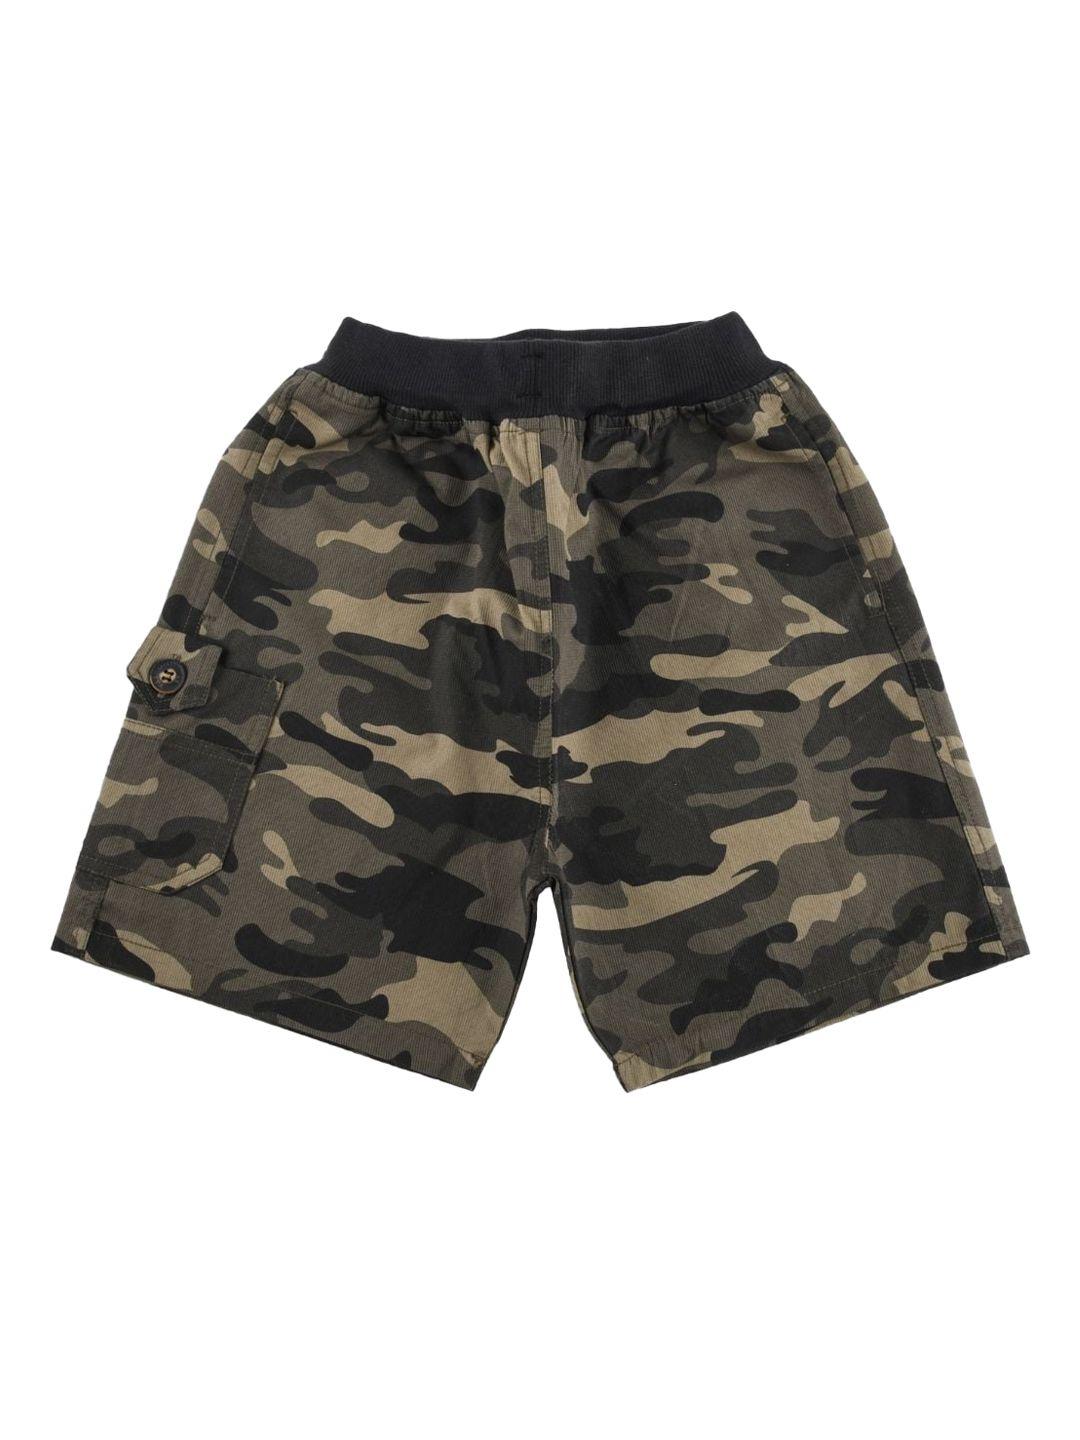 vedana boys brown & green camouflage printed shorts